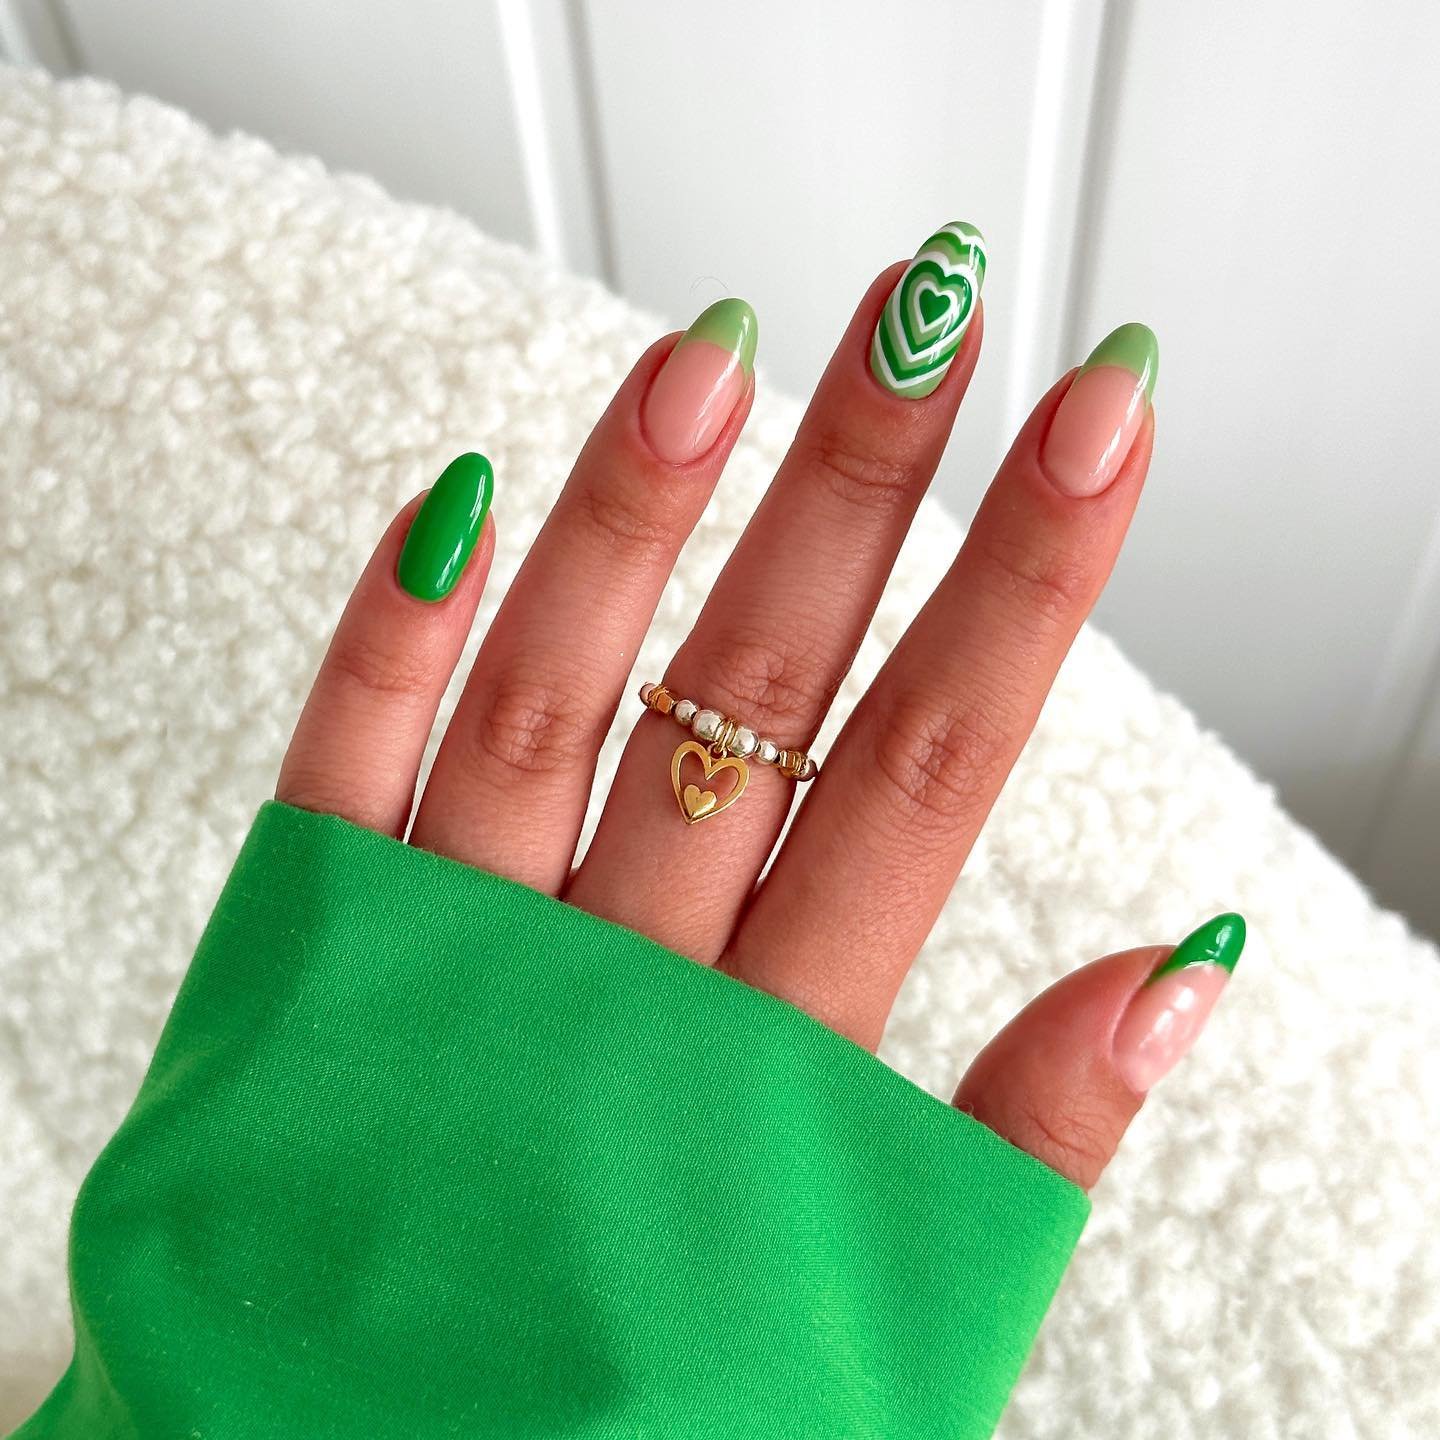 31 - Picture of Green Nails